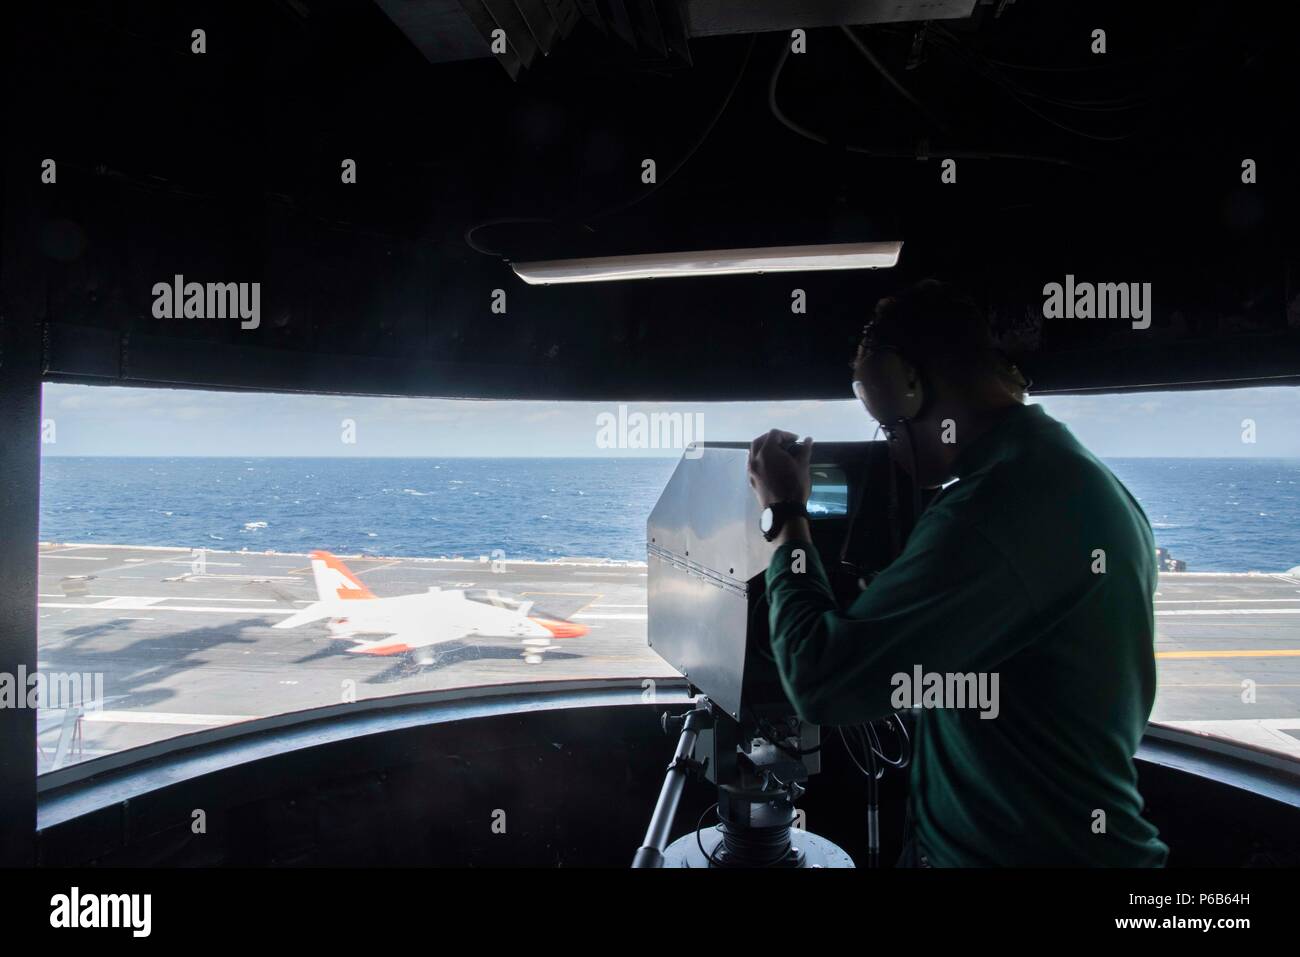 170210-N-KJ380-050 ATLANTIC OCEAN (Feb. 10, 2017) Electrician's Mate 3rd Class Aaron Ayersman records a T-45C Goshawk training aircraft assigned to Carrier Training Wing (CTW) 2 with the integrated launch and recovery television system as it makes an arrested landing on the flight deck of the aircraft carrier USS Dwight D. Eisenhower (CVN 69). The ship is conducting aircraft carrier qualifications during the sustainment phase of the Optimized Fleet Response Plan. (U.S. Navy photo by Mass Communication Specialist Seaman Neo Greene III/Released) Stock Photo